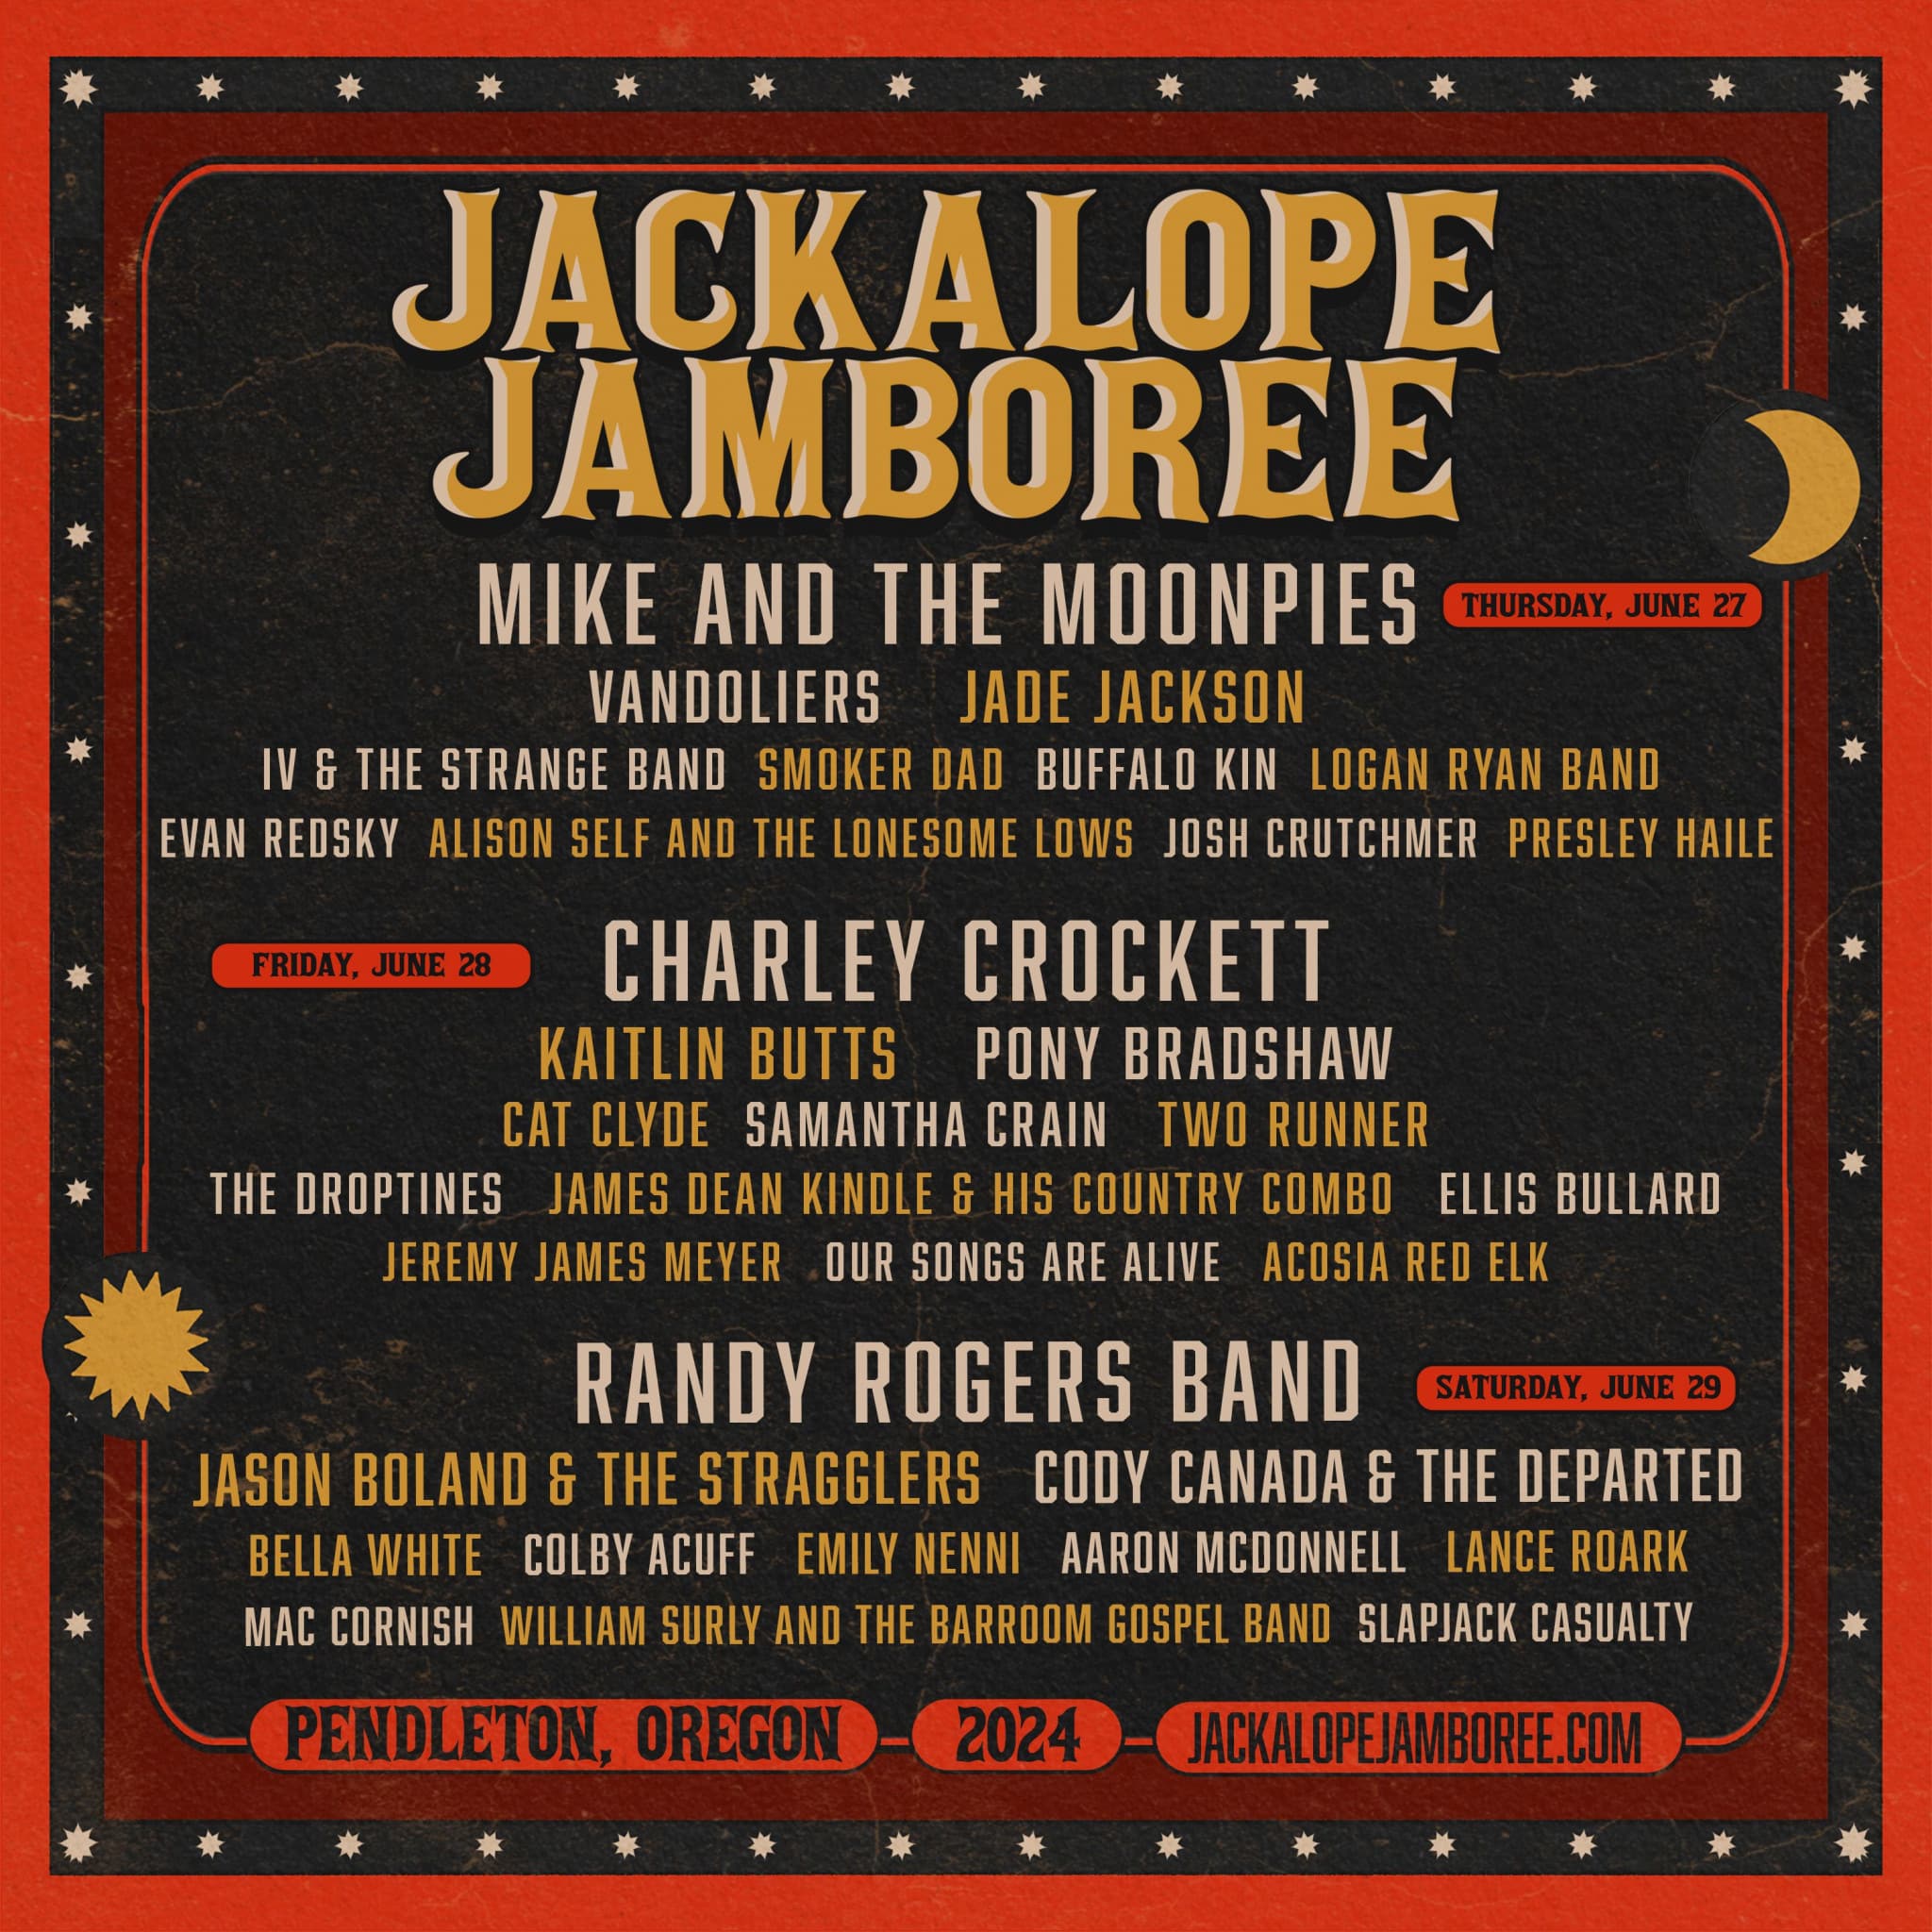 Jackalope Jamboree Festival Features TopNotch Lineup Of Country